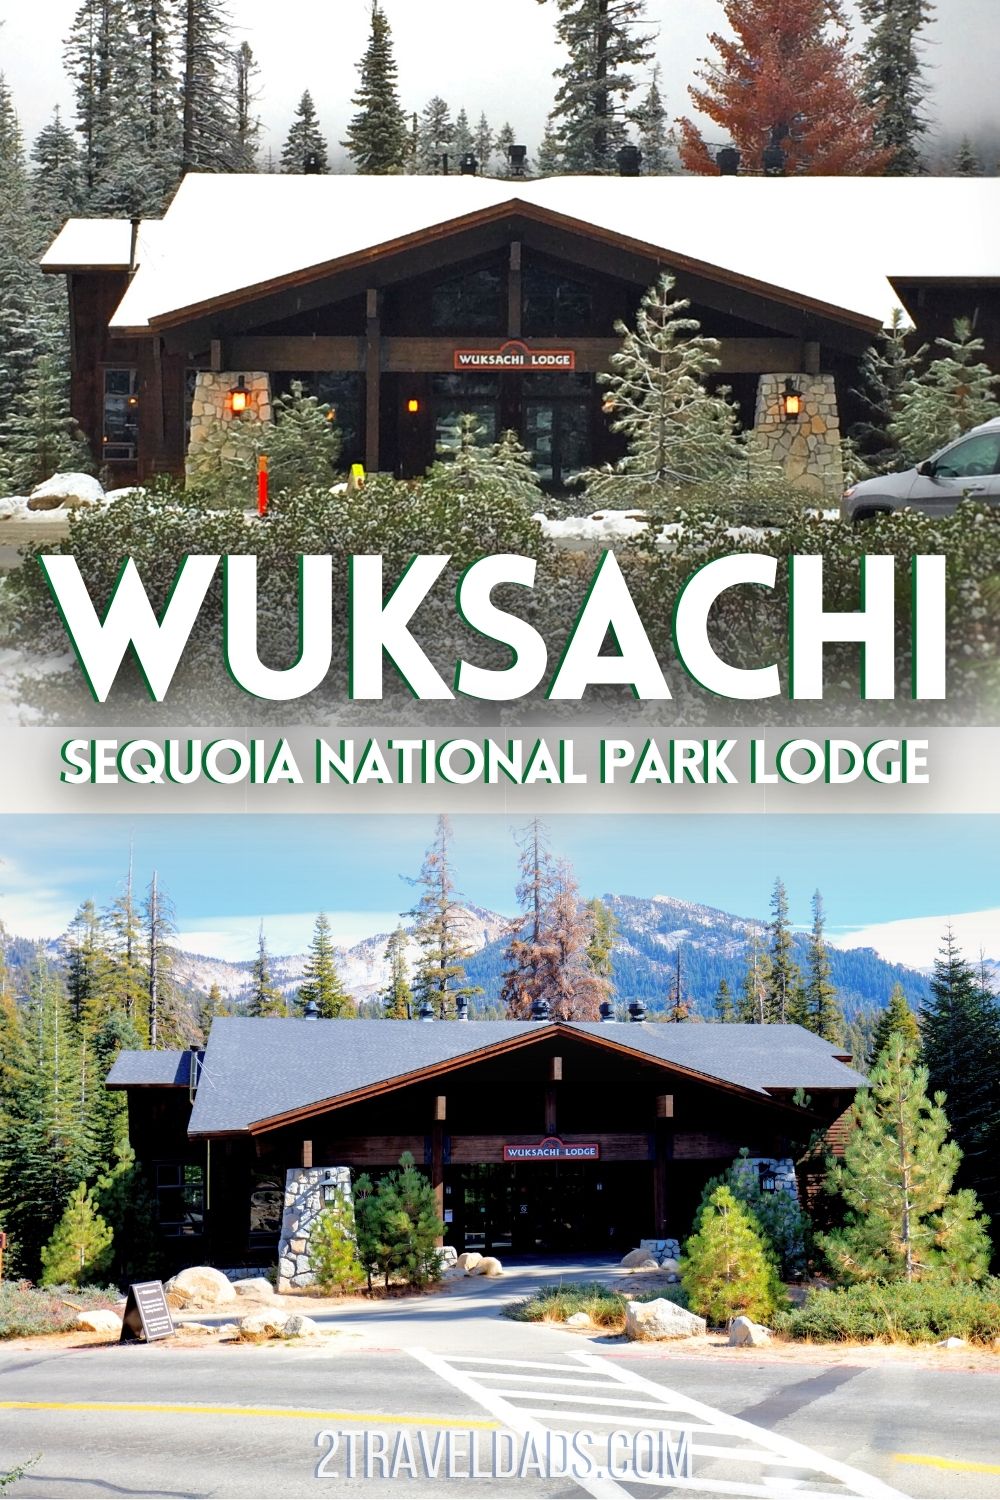 The Wuksachi Lodge in Sequoia National Park is set in a beautiful location and has (surprisingly) spacious rooms. Find out about staying at the Wuksachi, things to do in Sequoia National Park and planning a trip to the Sierras of California.